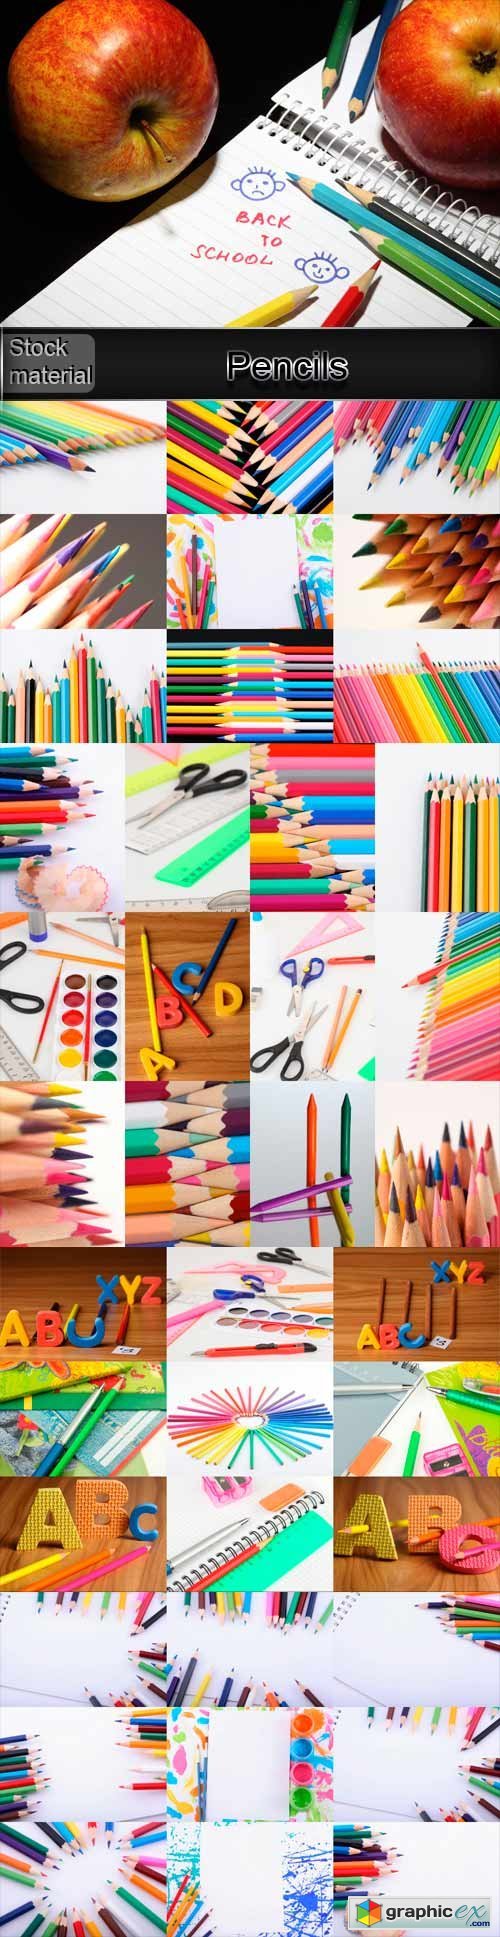 Pencils, paint, stationery products